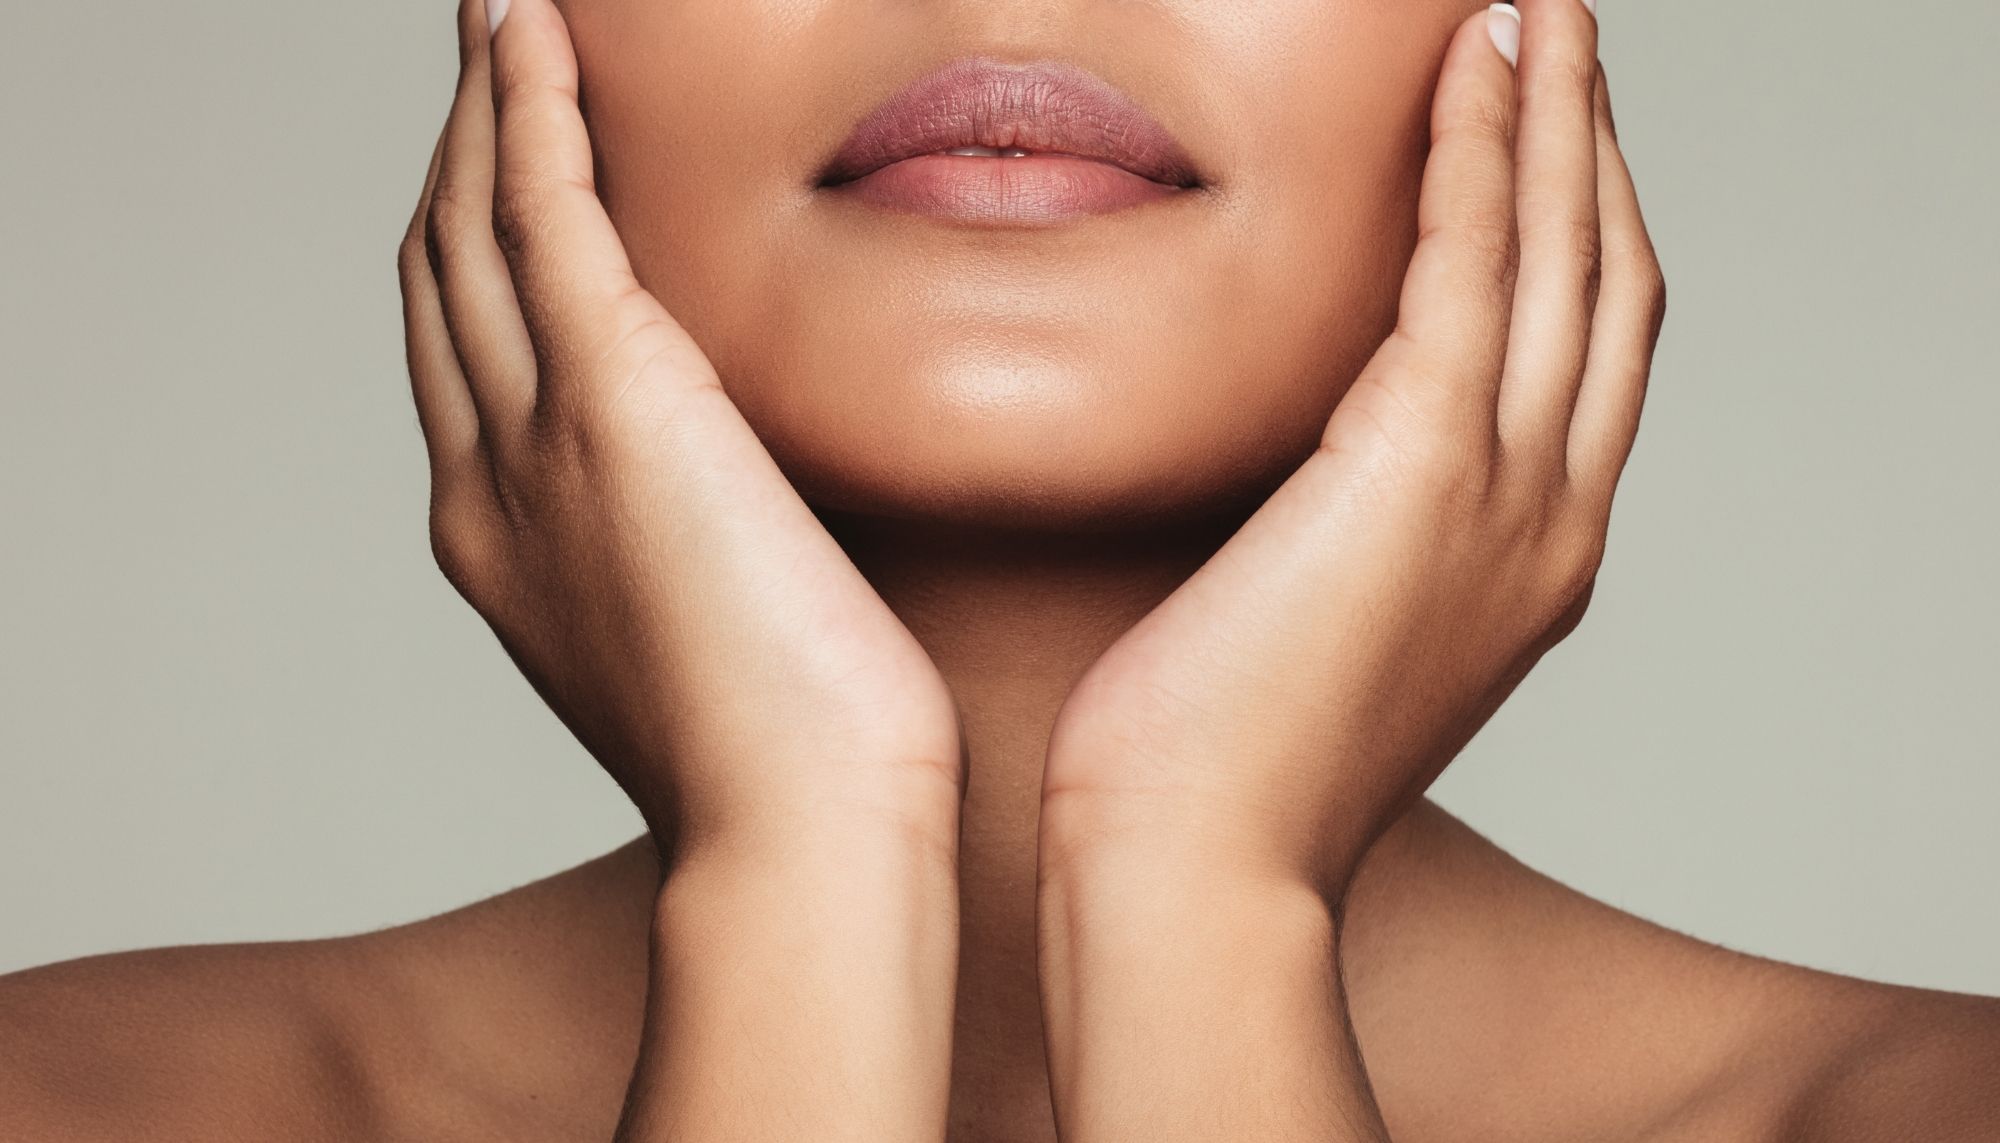 Dermaplaning at Home: How to Guide + Everything You Need to Know